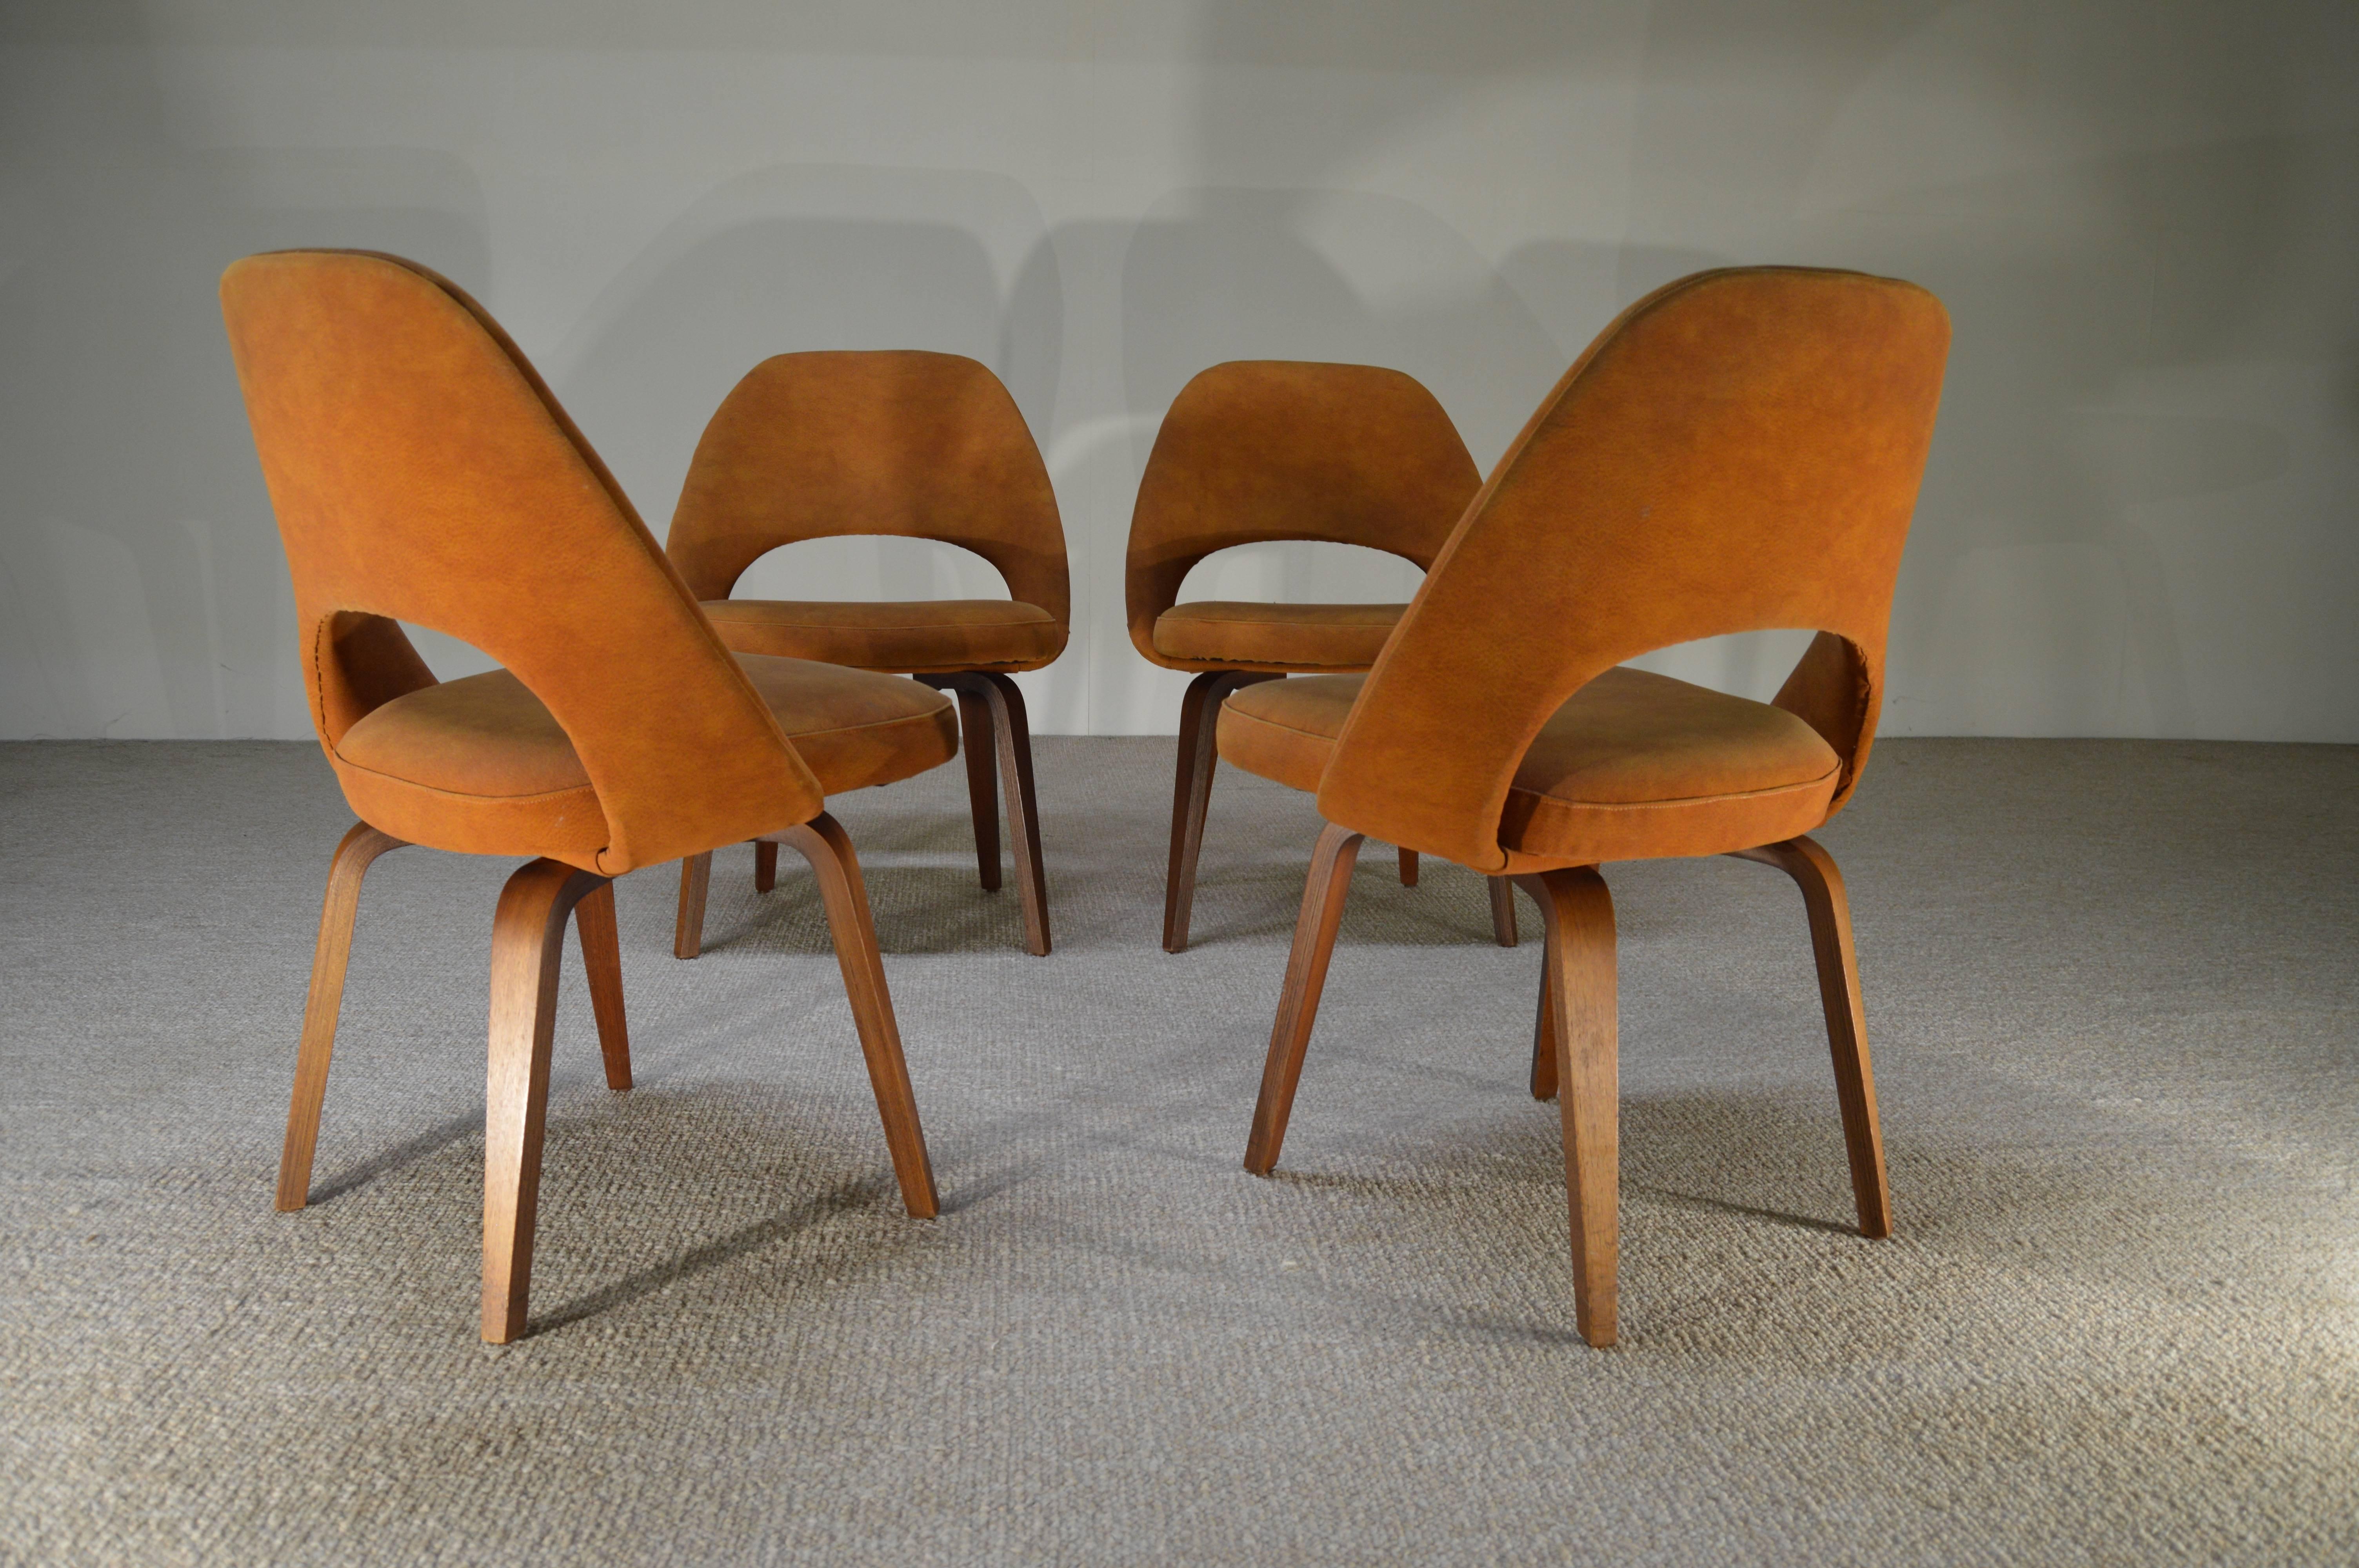 A set of four early Eero Saarinen side chairs having leather upholstery and bentwood legs. Produced by Knoll.
Original Knoll stickers are not present.